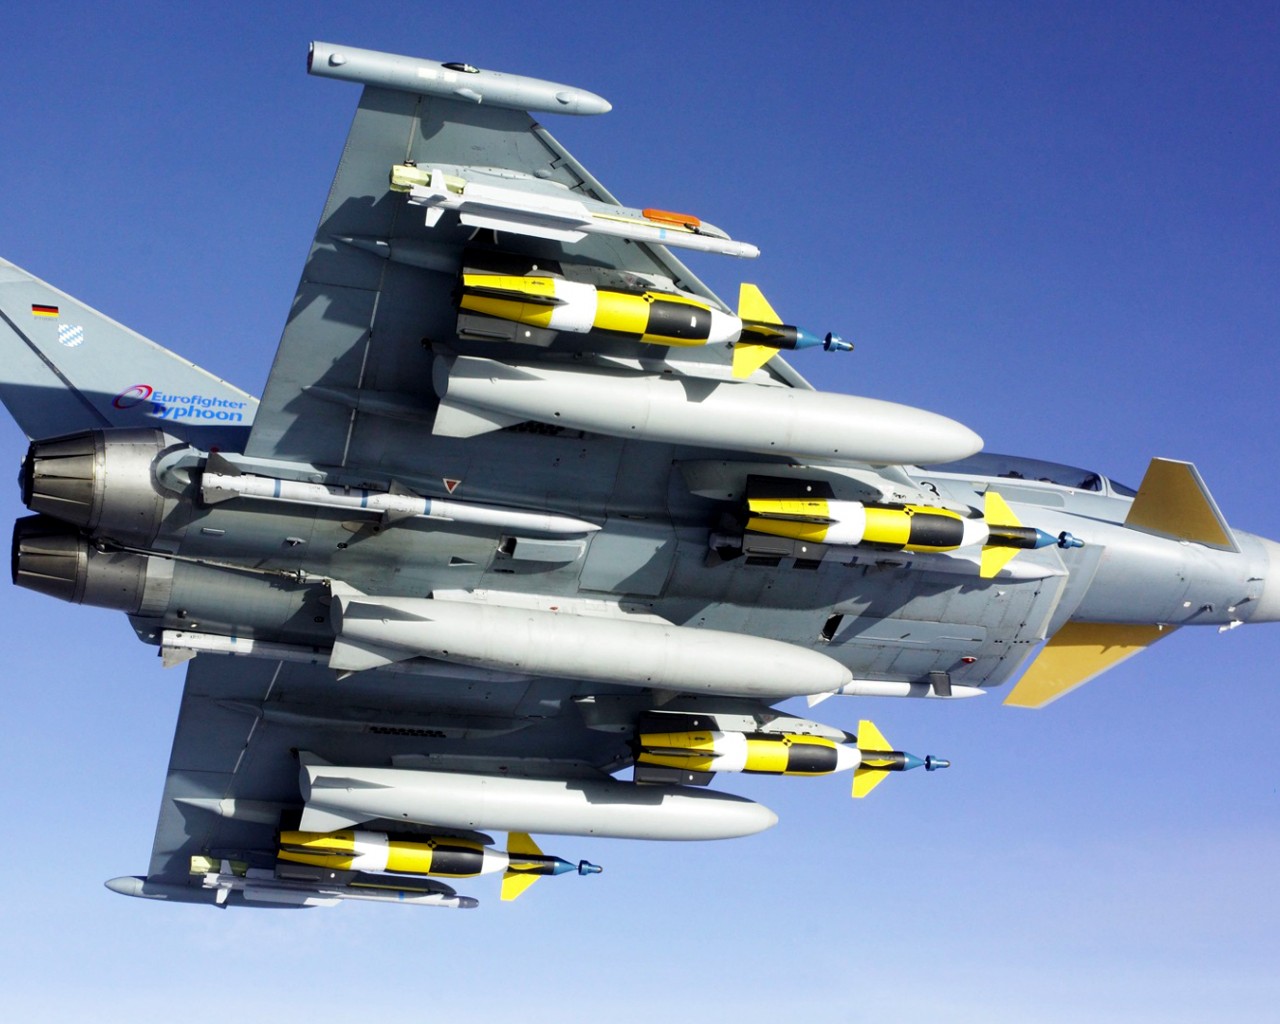 Defence Aviation News: Gripen, SAAB’s Eurofighter Rival